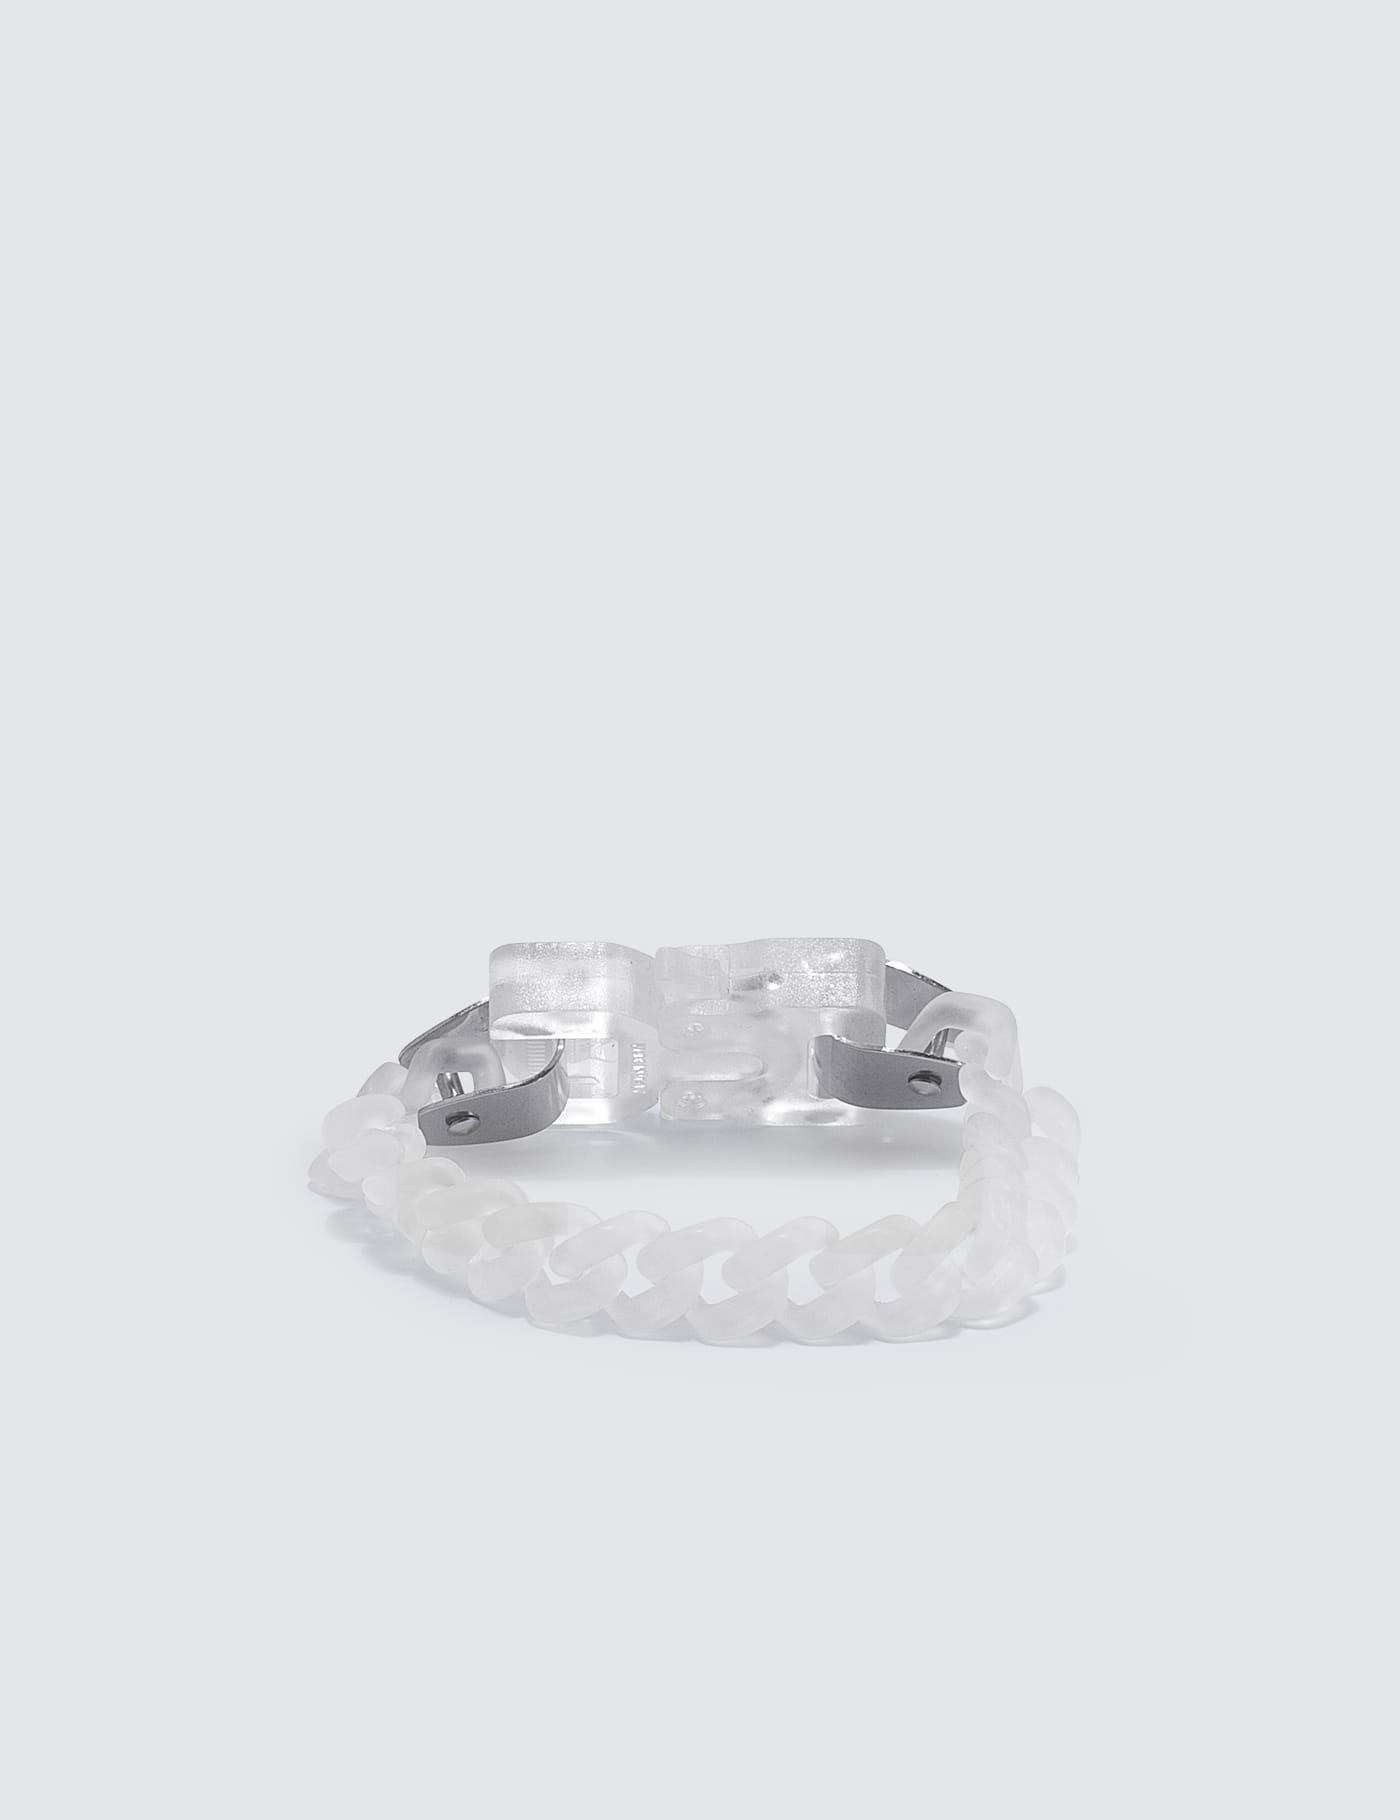 1017 ALYX 9SM - Transparent Chain Bracelet | HBX - Globally Curated Fashion  and Lifestyle by Hypebeast